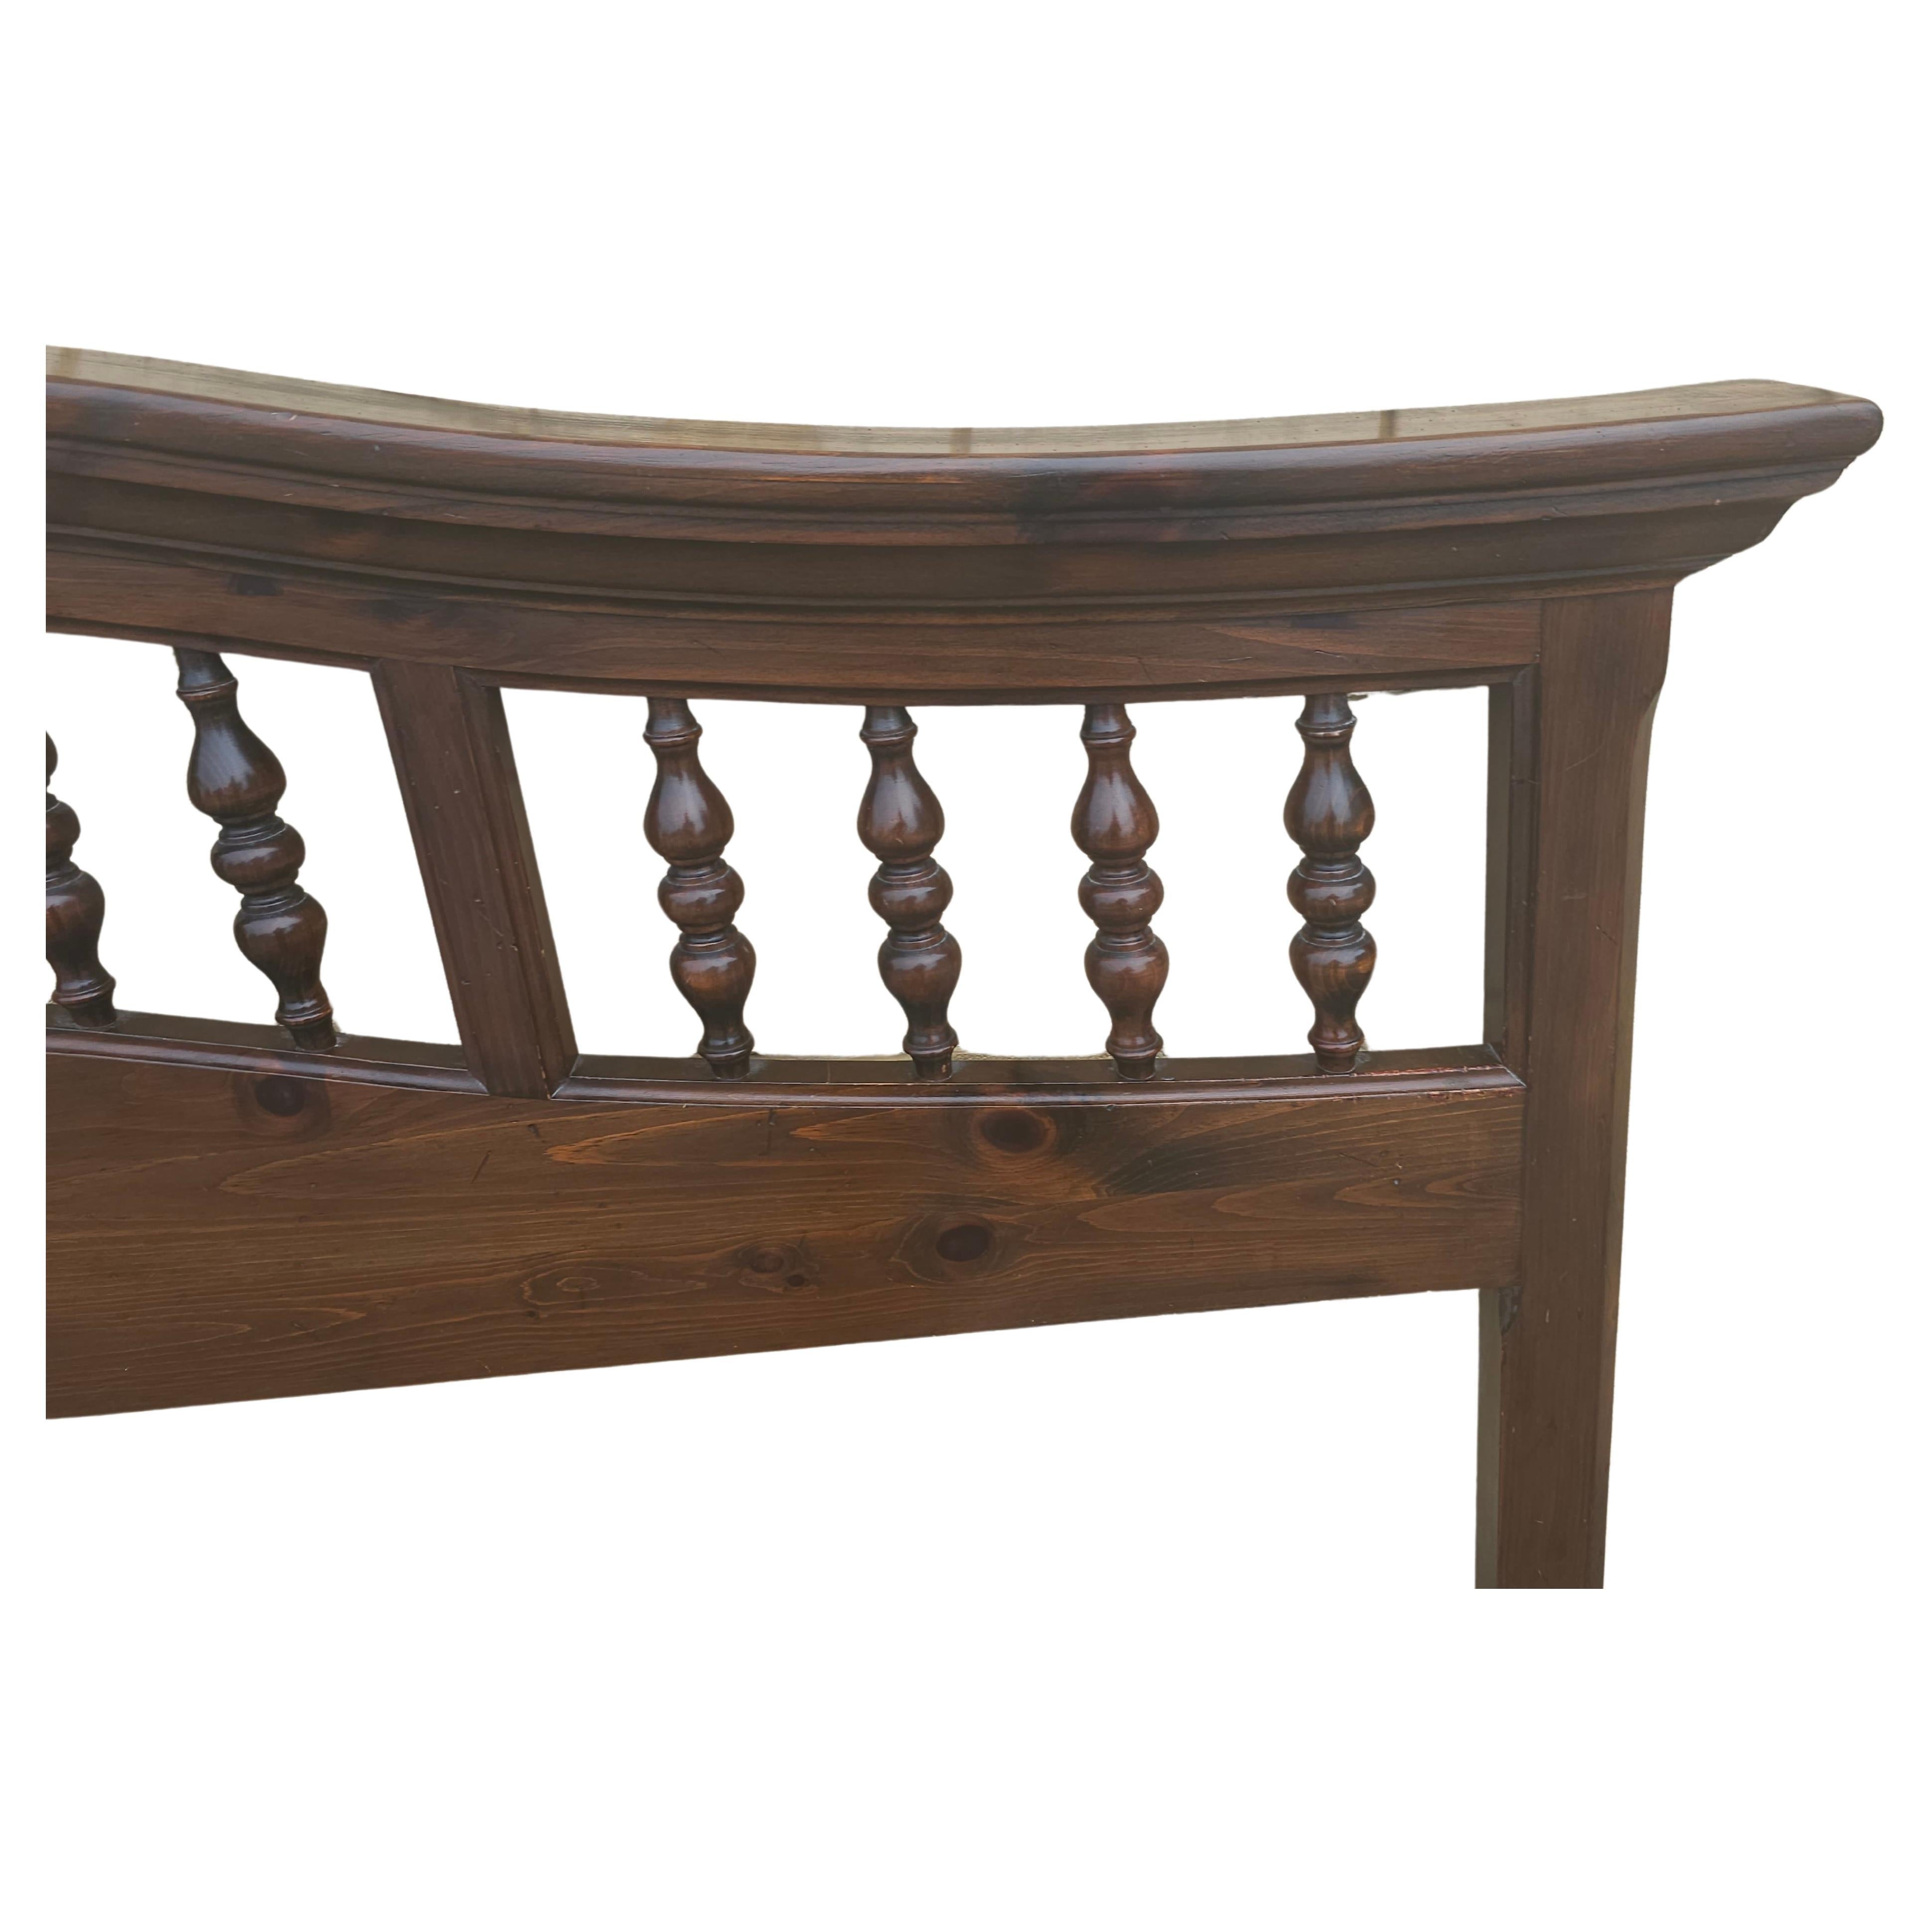 Stained Mid-20th Century Antiqued Pine King Size Arched Top Headboard For Sale